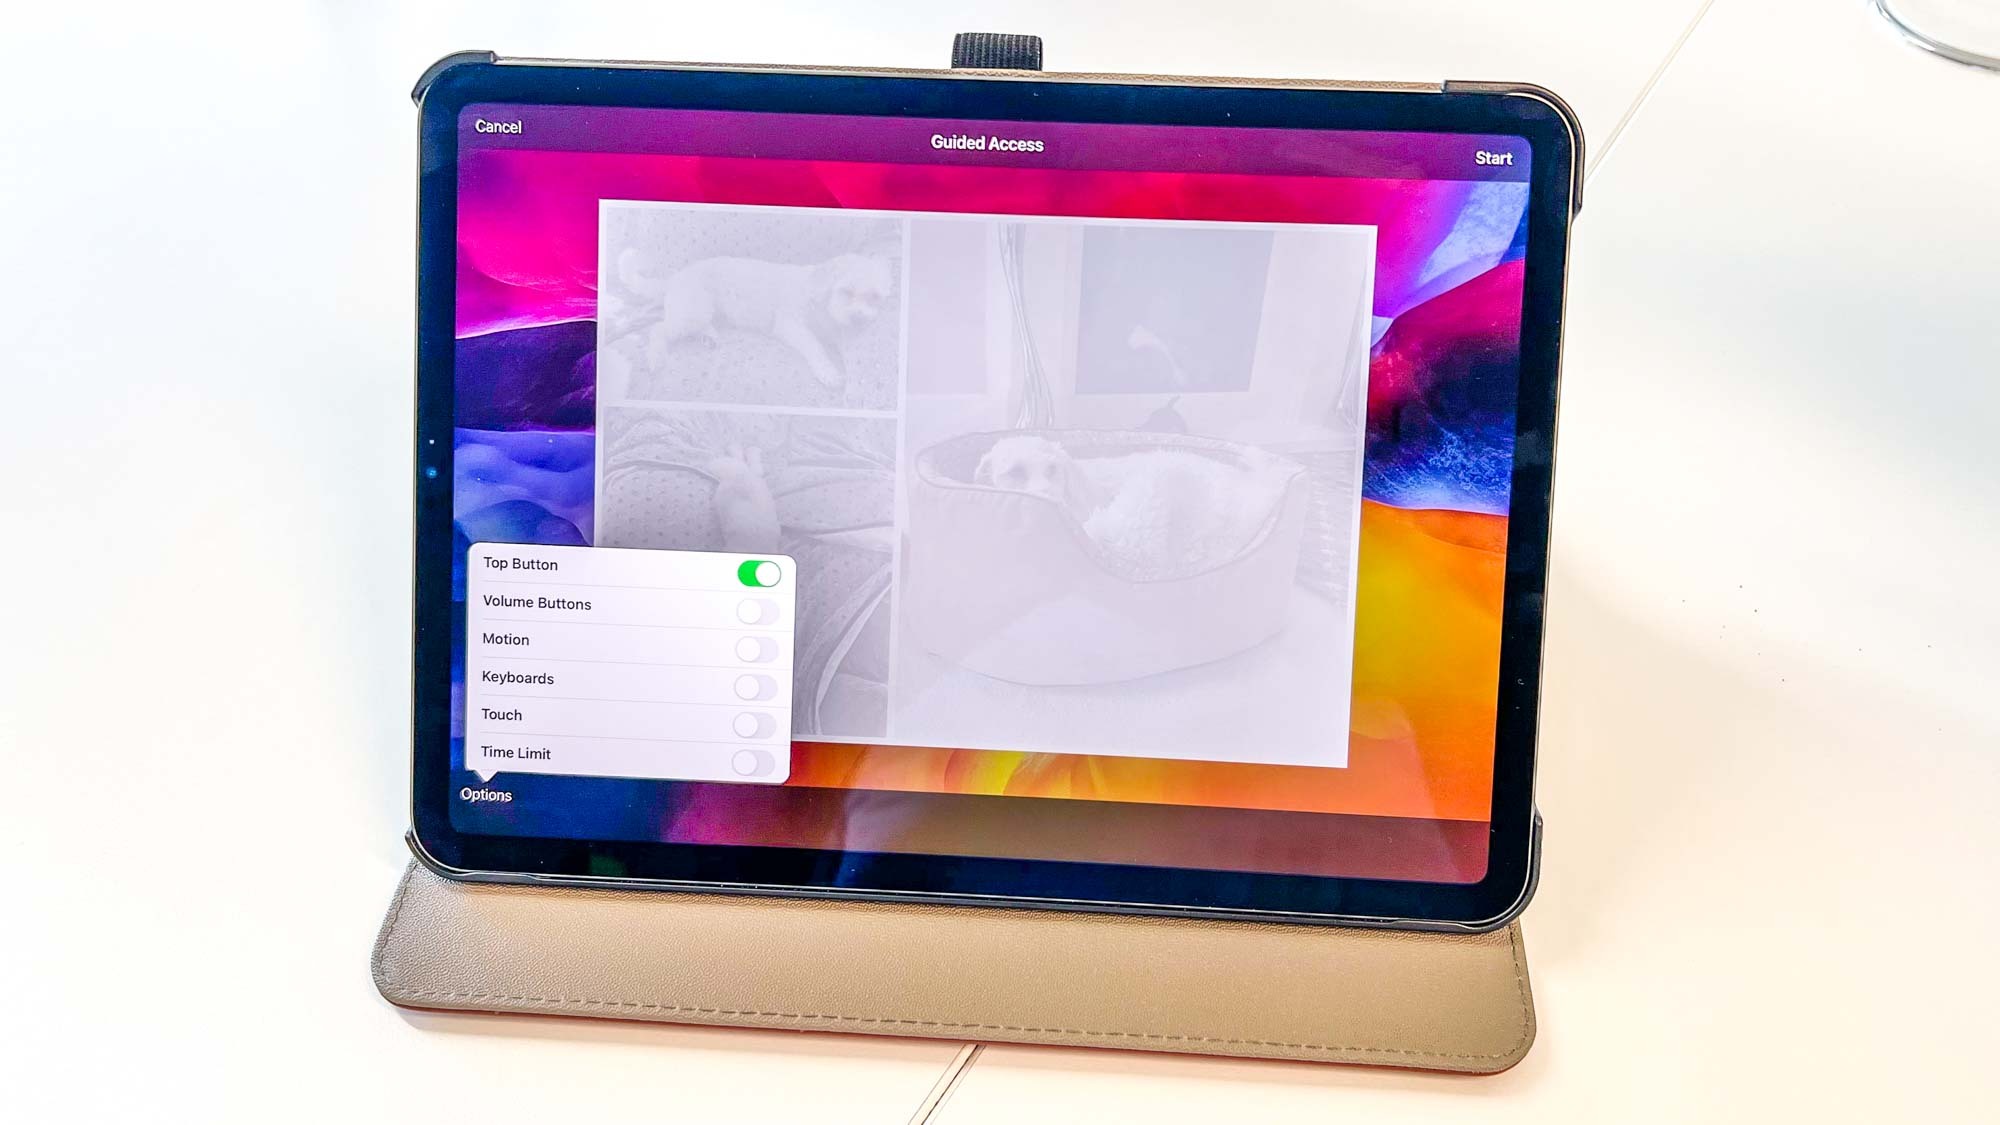 An iPad with Guided Access options open